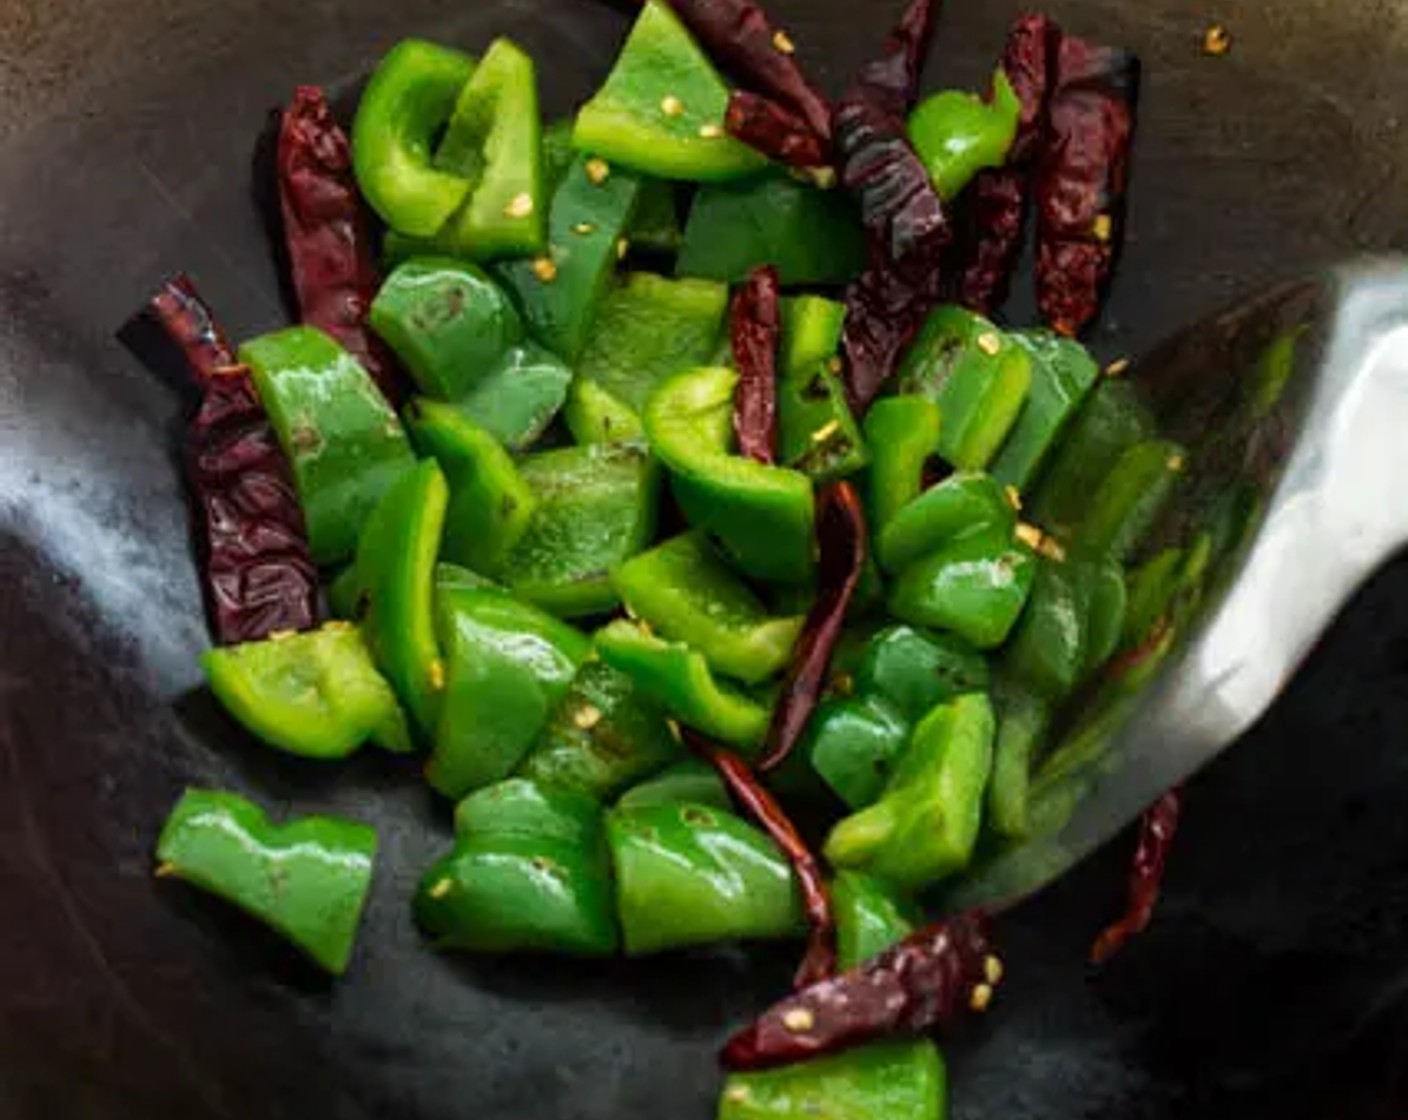 step 3 Heat Cooking Oil (2 Tbsp) in a wok over medium-high heat. Add Green Bell Pepper (1) and Dried Red Chili Peppers (6). Stir-fry slowly, allowing the skin of the bell pepper to blister, then remove the peppers and dried chili from the wok.